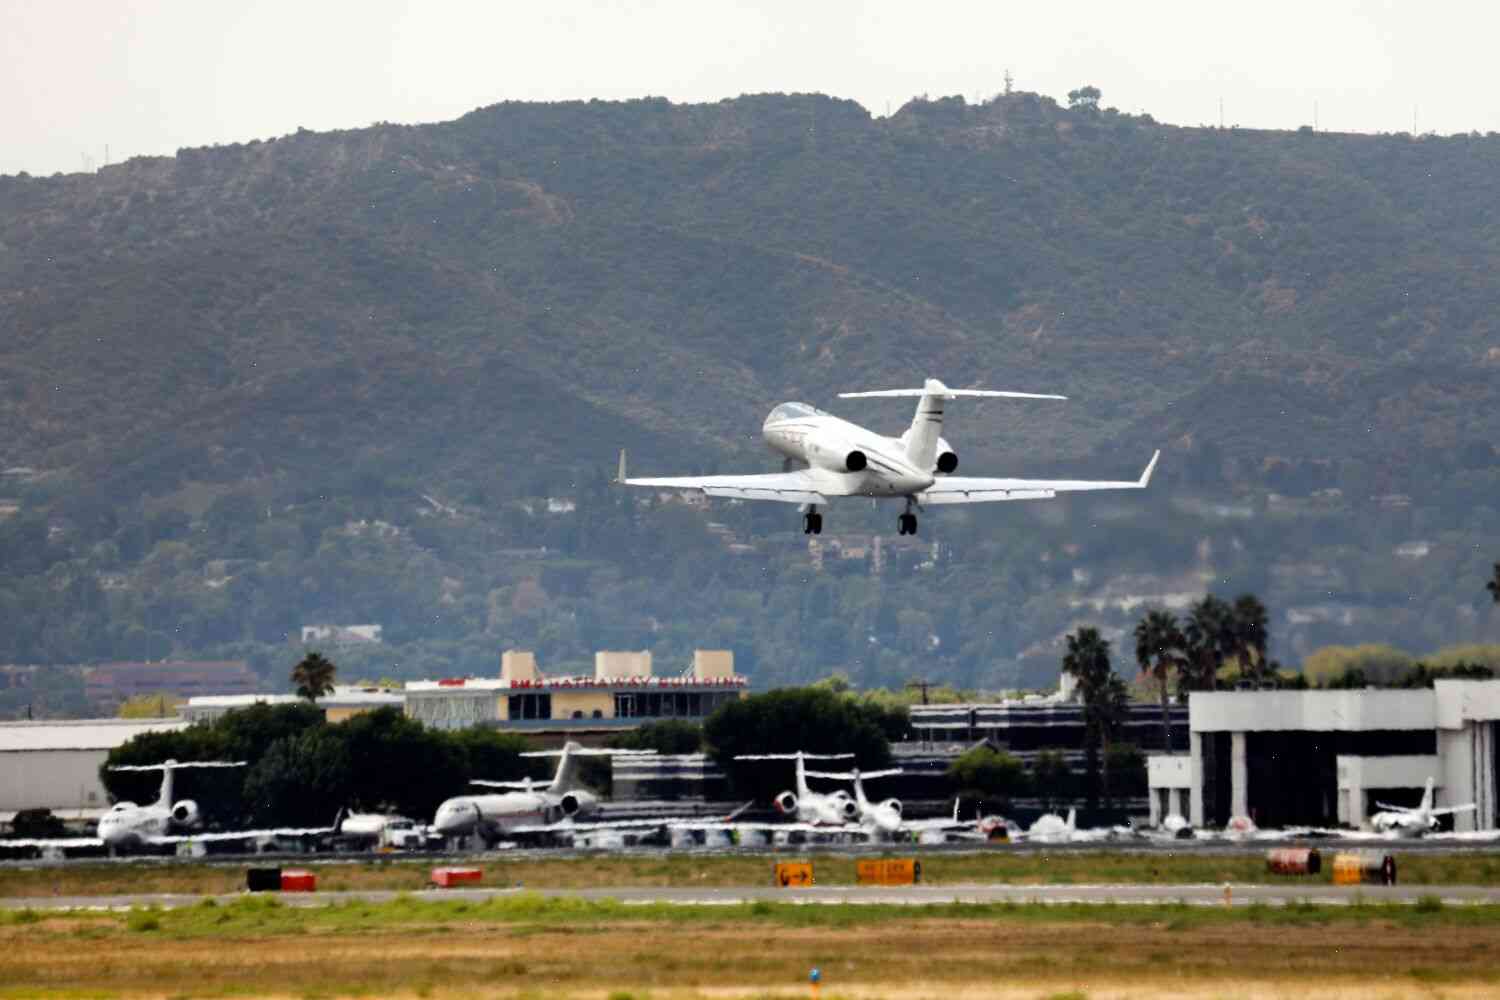 The City of Van Nuys is Still Planning to Build a New Airport